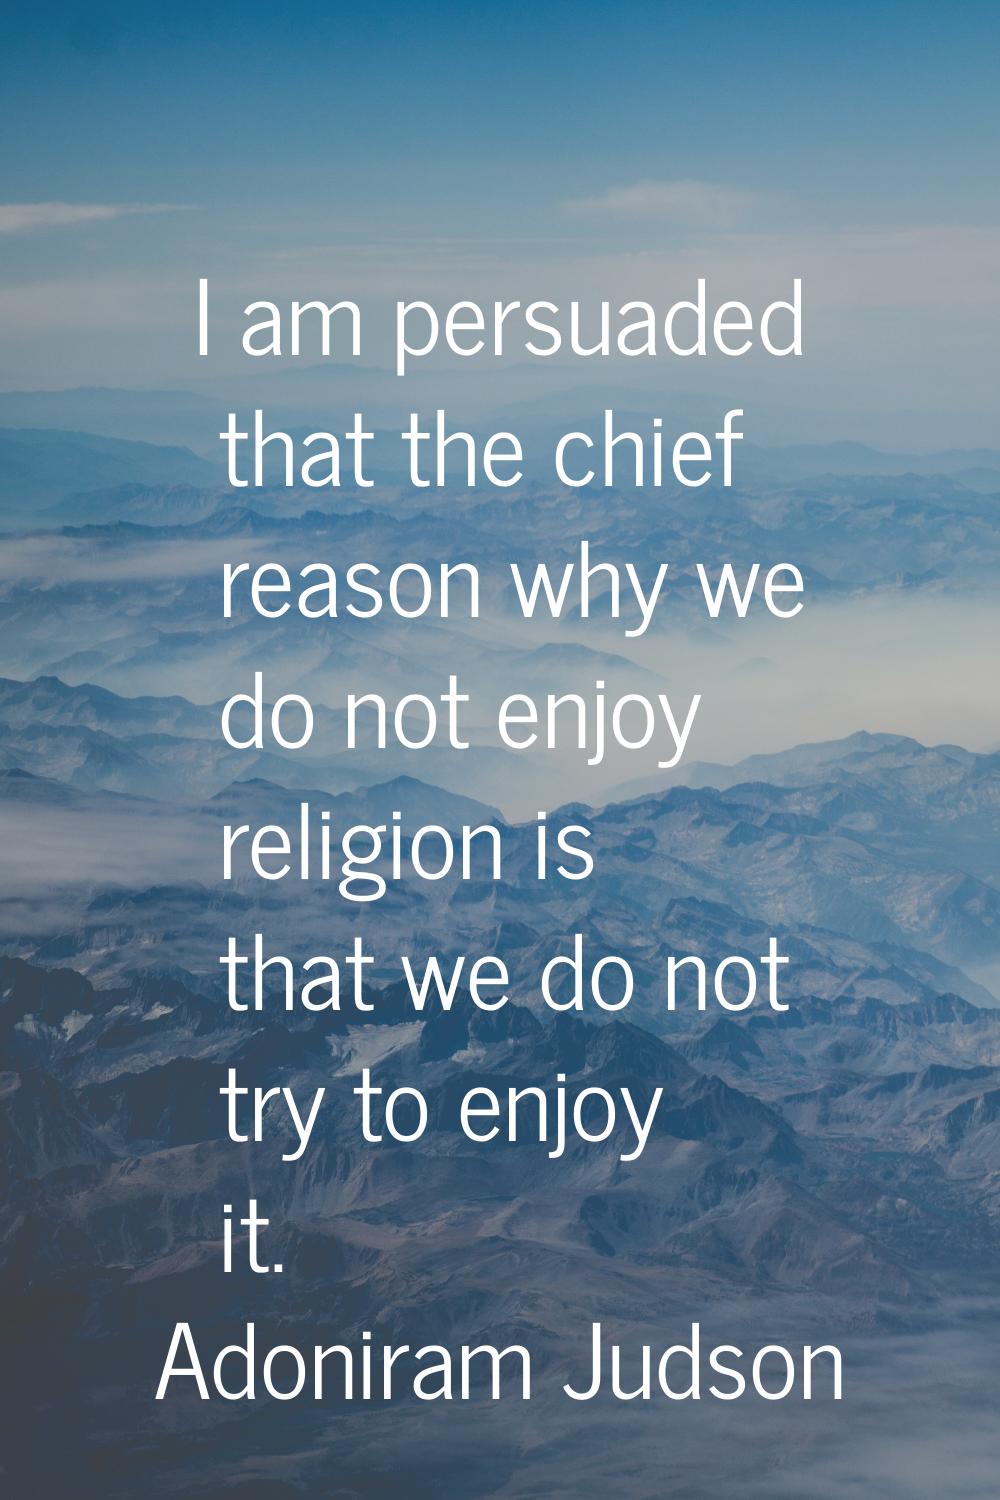 I am persuaded that the chief reason why we do not enjoy religion is that we do not try to enjoy it